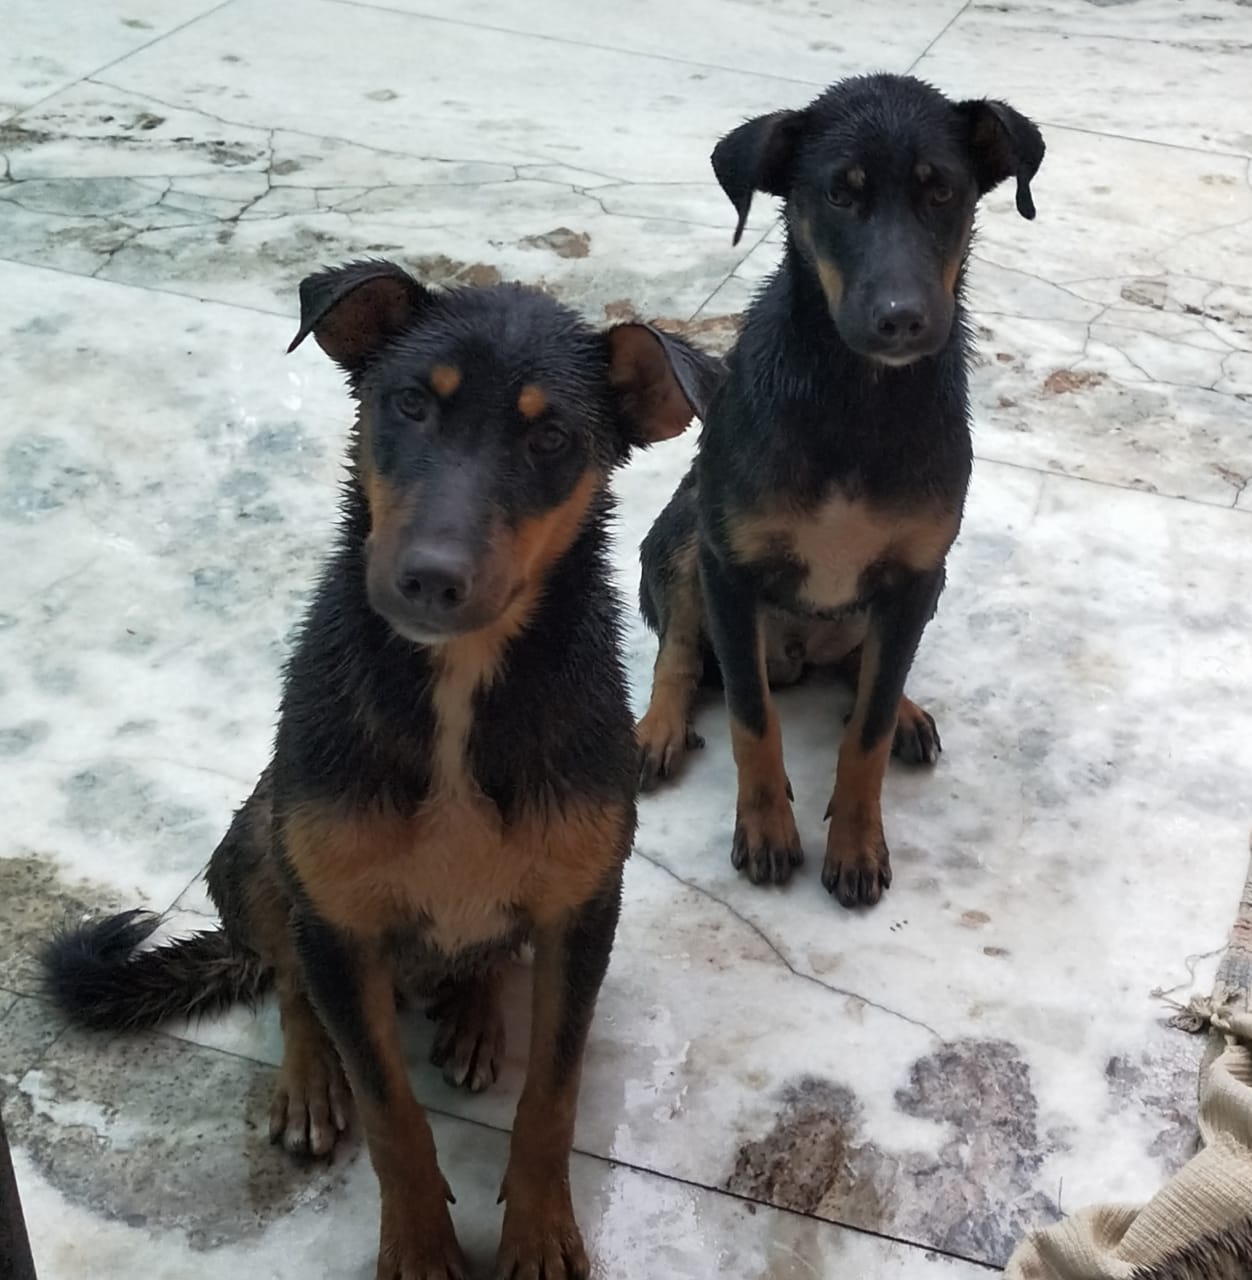 Two almost identical looking puppies in black and brown sitting side by side looking at the camera. The two brothers Gulab and Jamun waiting ardently for food.